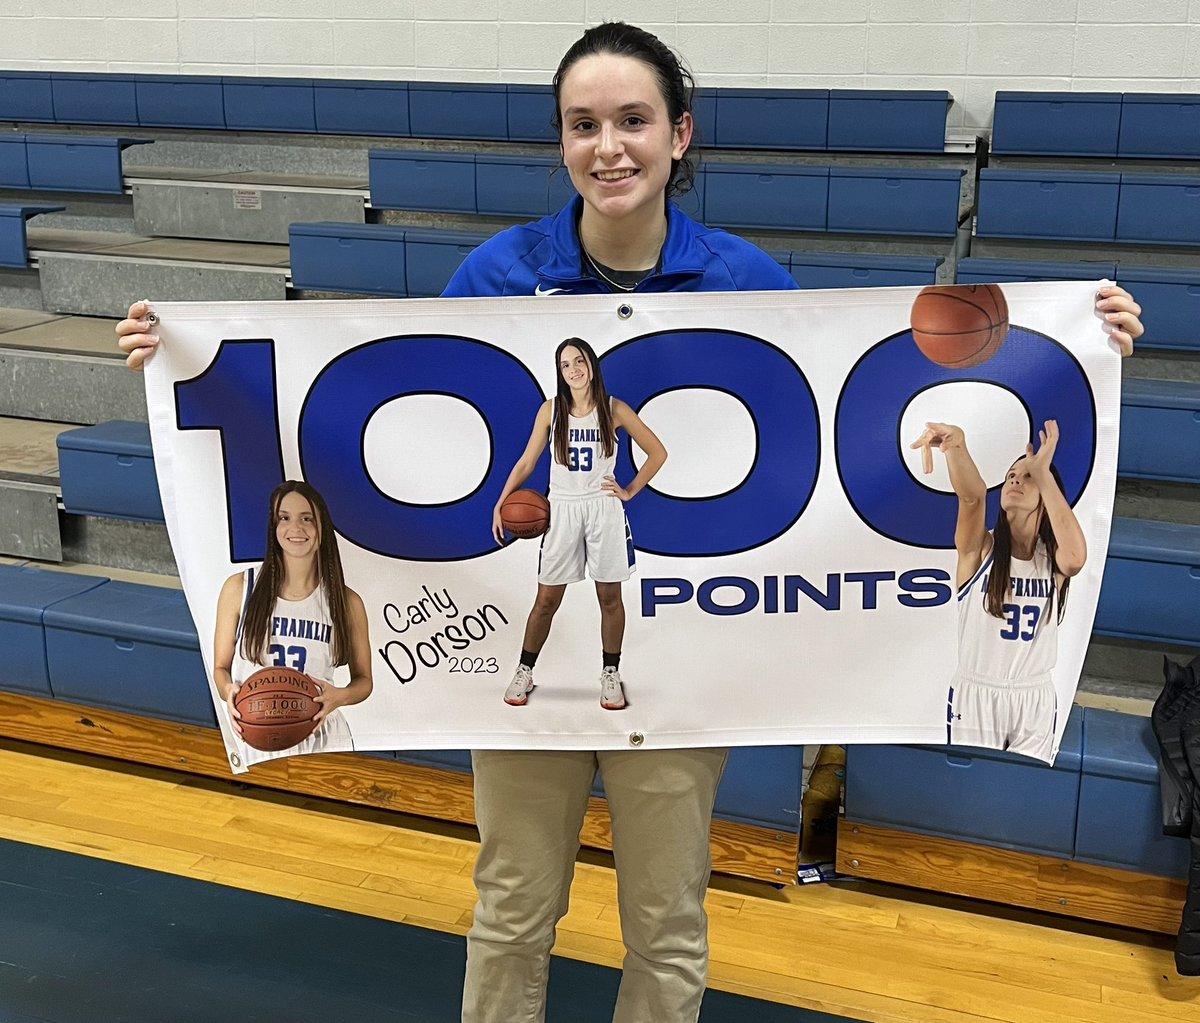 Congratulations Carly!  We are so proud of all your hard work.  #1000pointclub